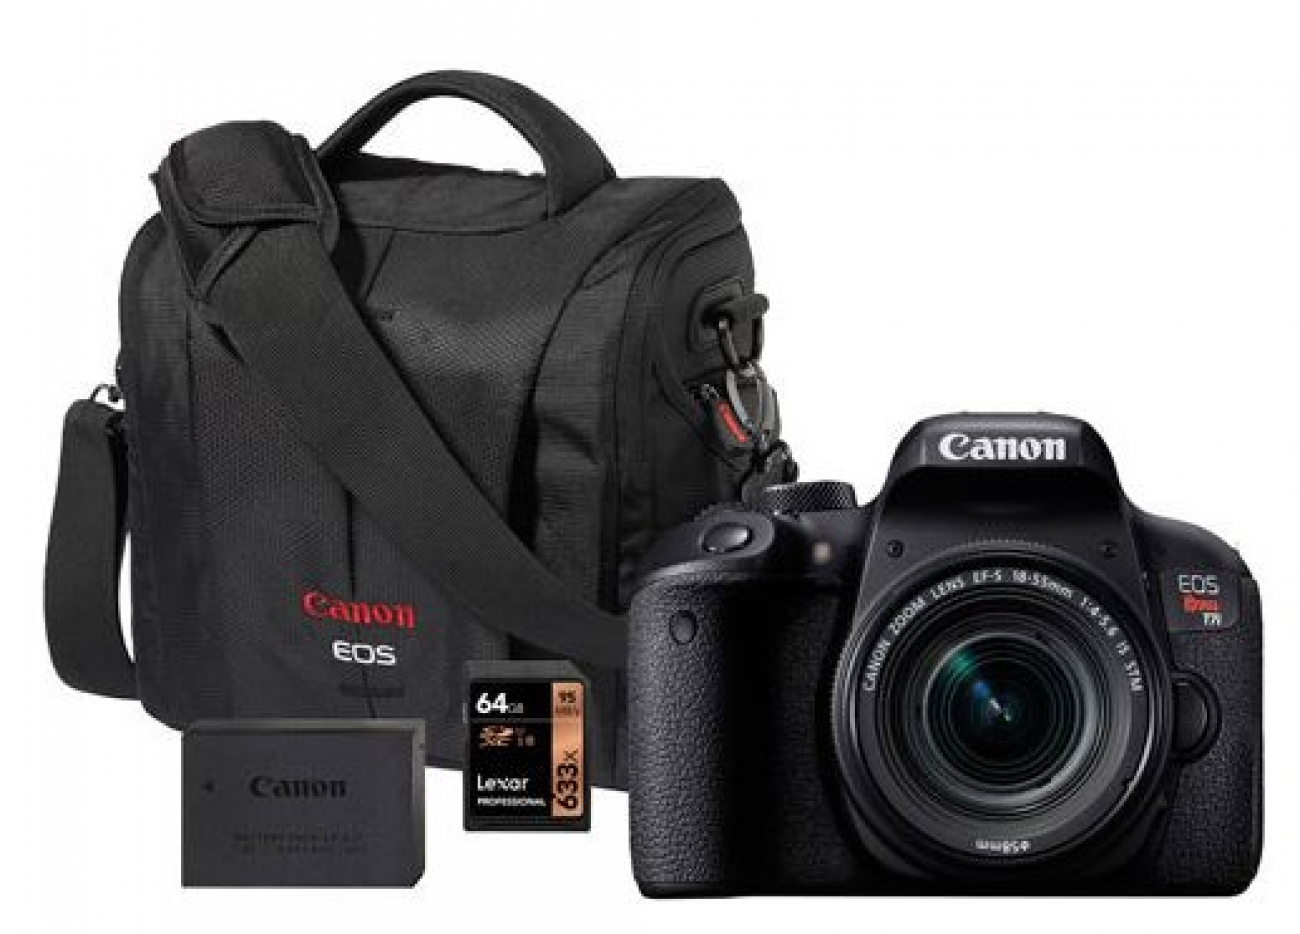 Canon EOS Rebel T7i DSLR Camera with 18-55mm Lens & Accessory Kit